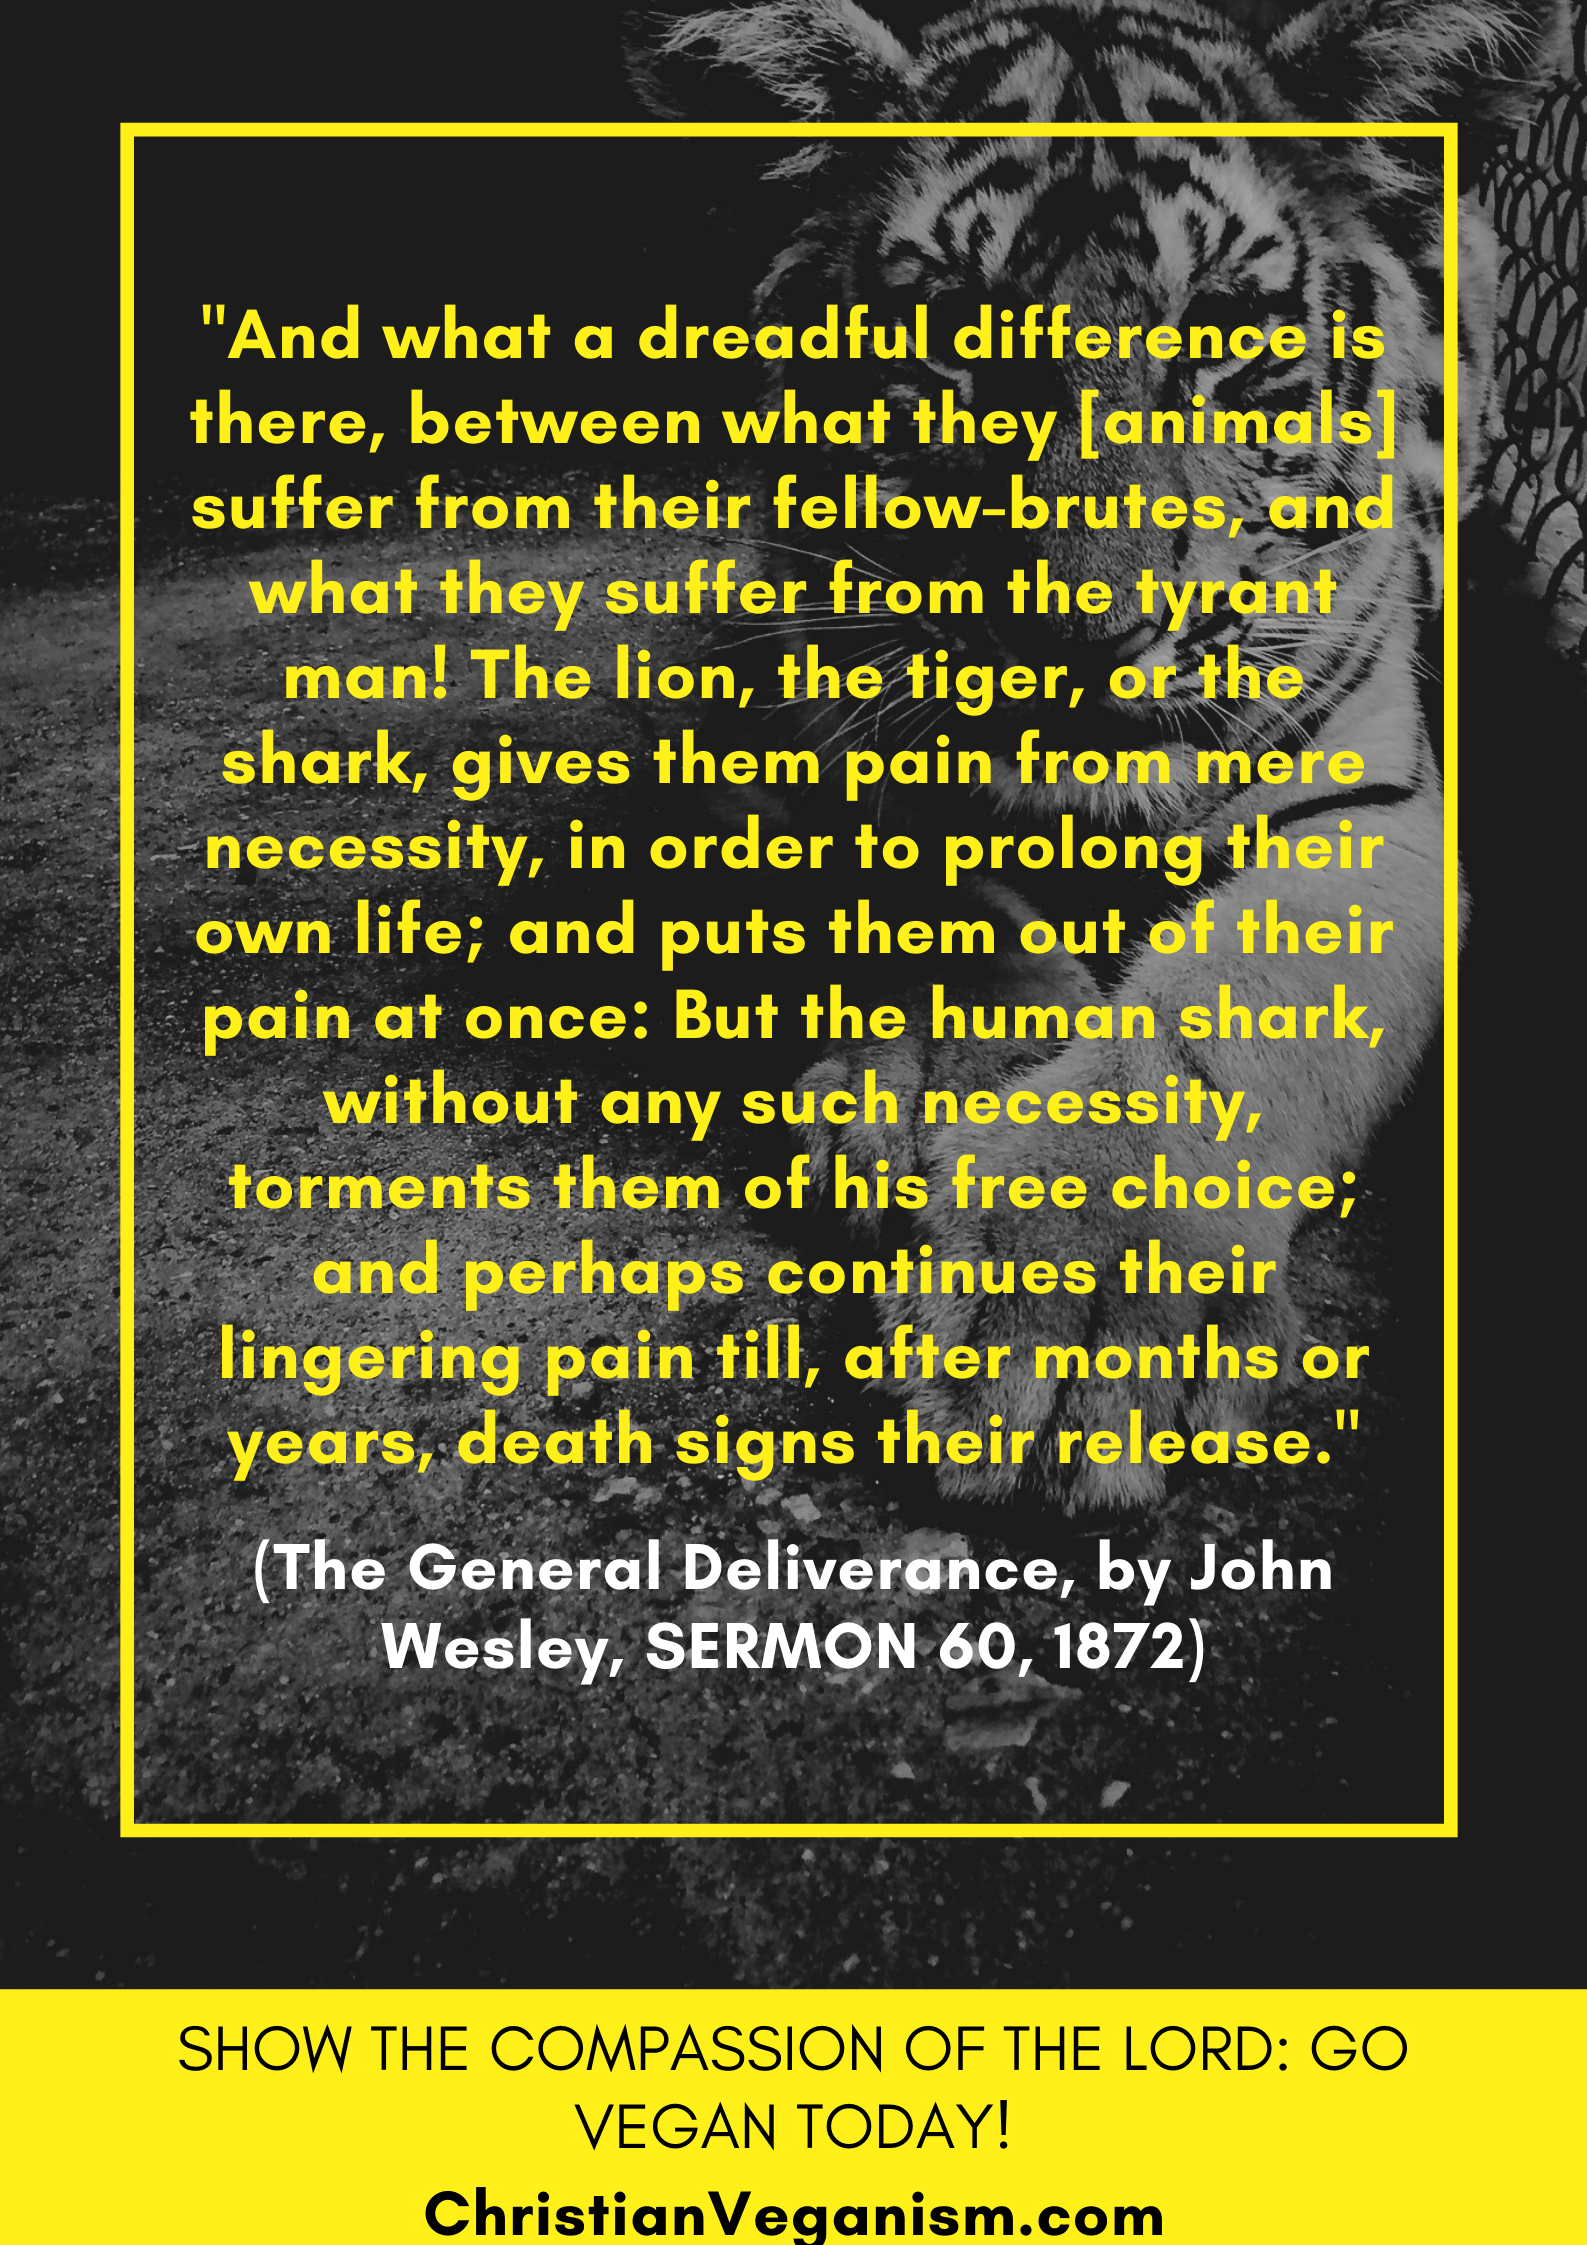 (The General Deliverance, by John Wesley, SERMON 60, 1872)